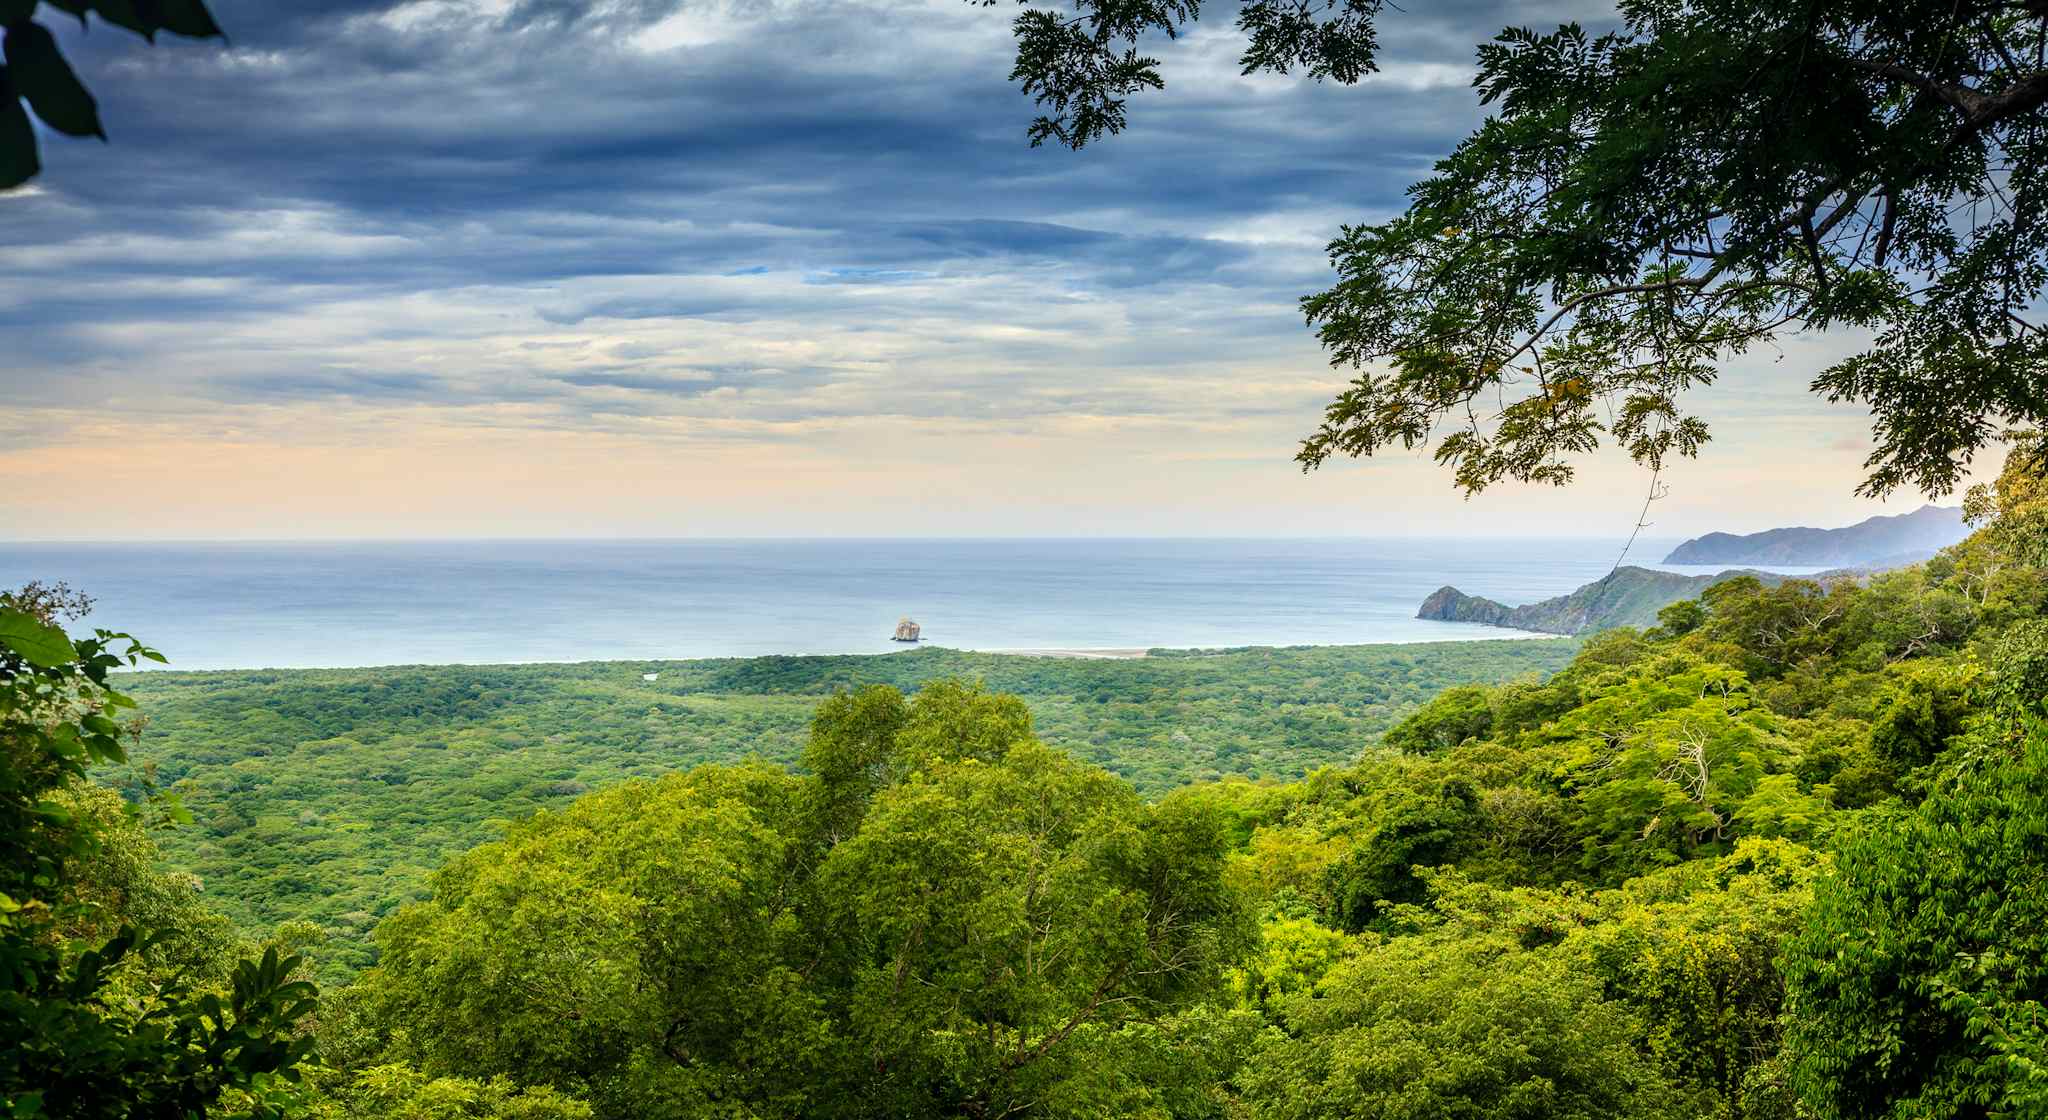 View through a gap in the trees of Costa Rica's Pacific coastline, with forest in the foreground.